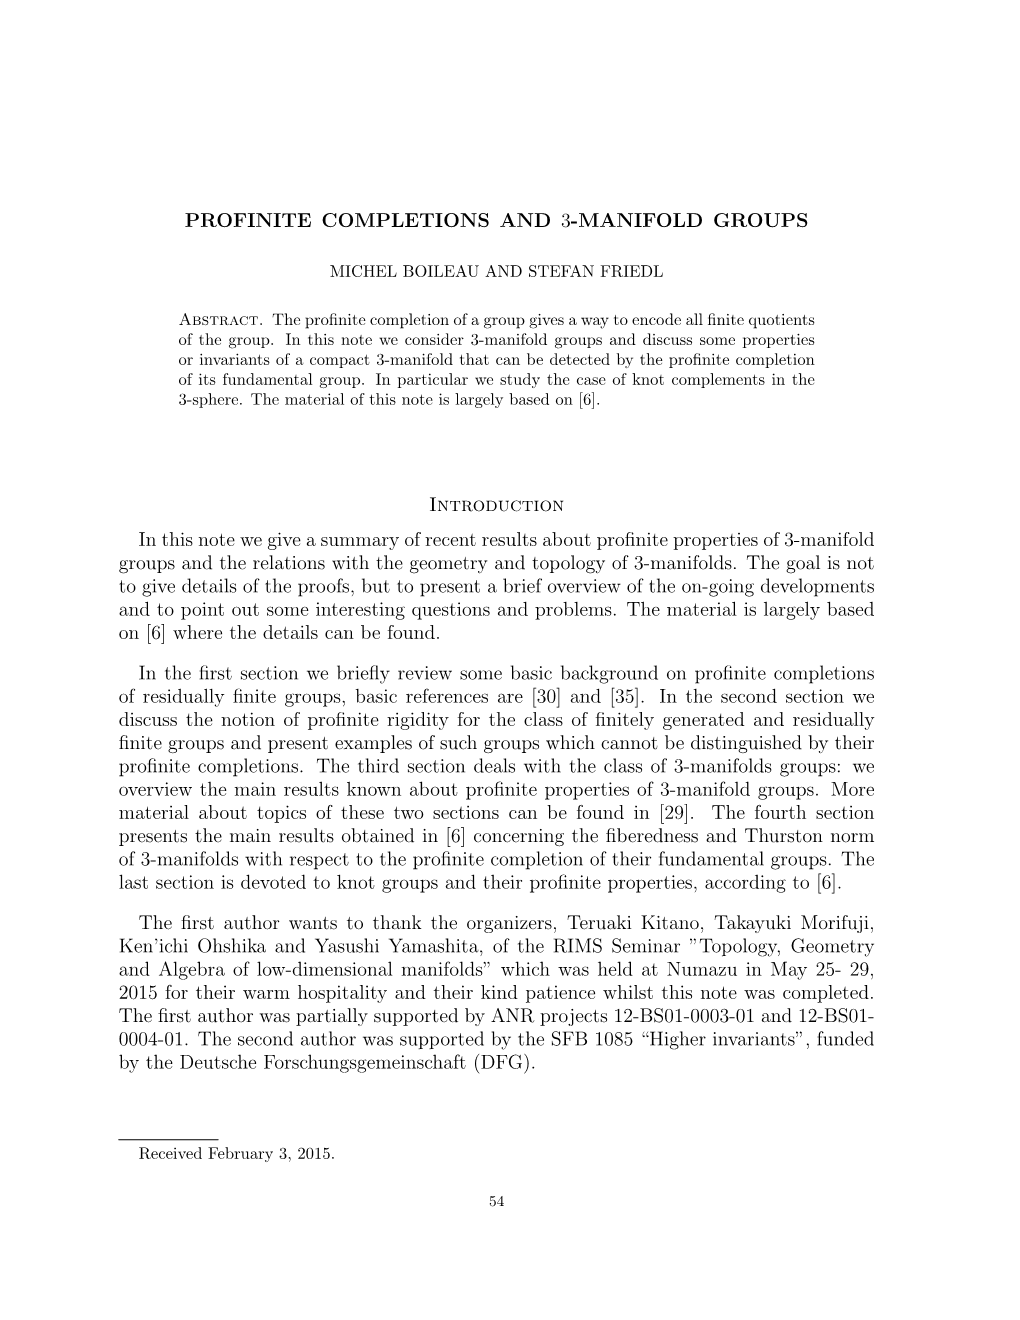 Profinite Completions and 3-Manifold Groups